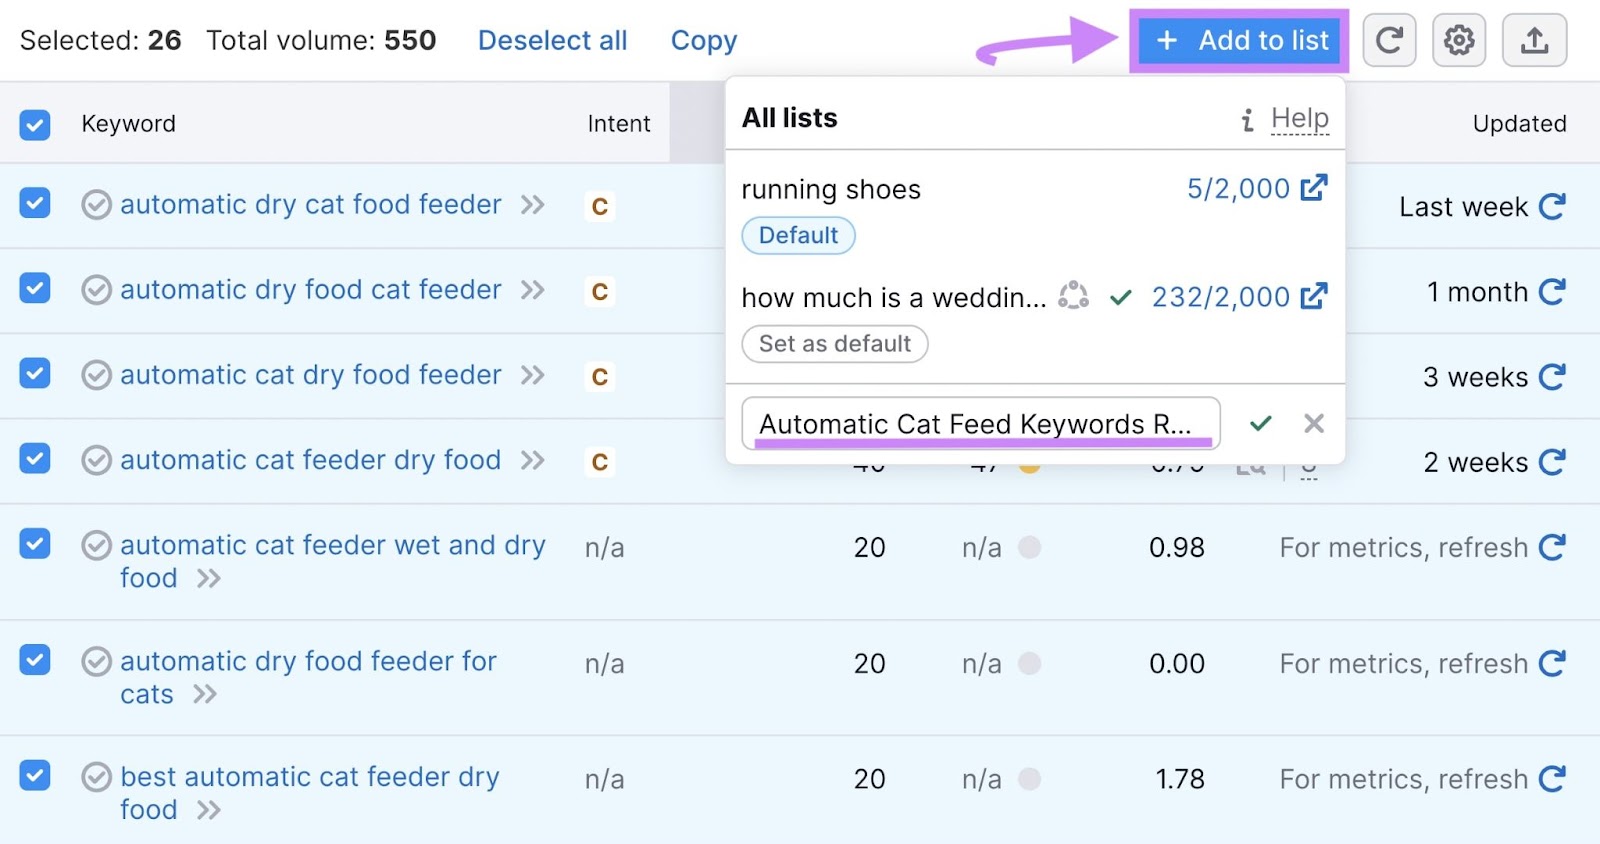 Adding keywords to a list named “Automatic Cat Feed Keywords Research"